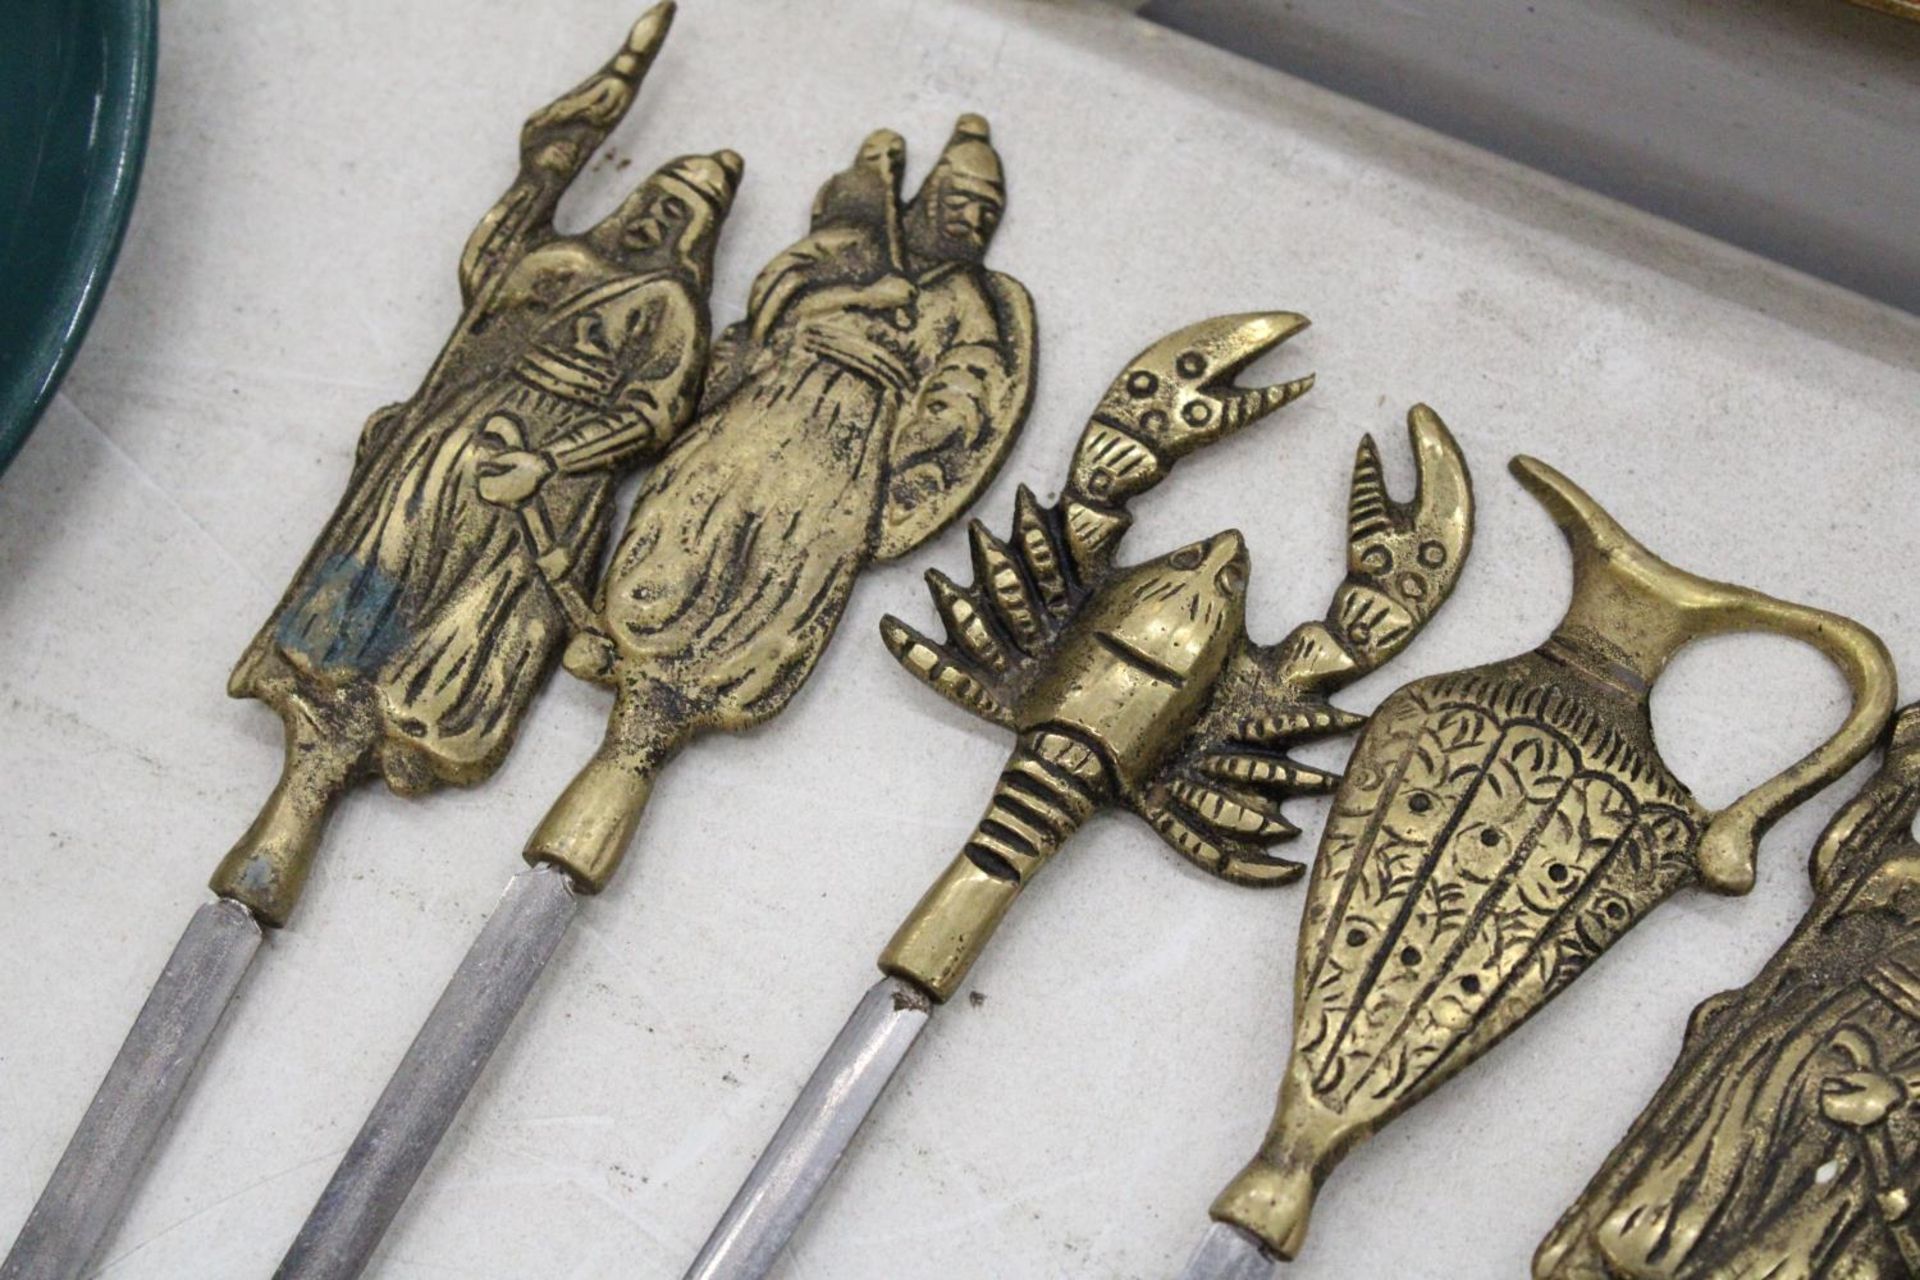 SEVEN VINTAGE BRASS MEAT SKEWERS, LOBSTER, URNS AND WARRIORS - 17 INCH LONG - Image 3 of 4